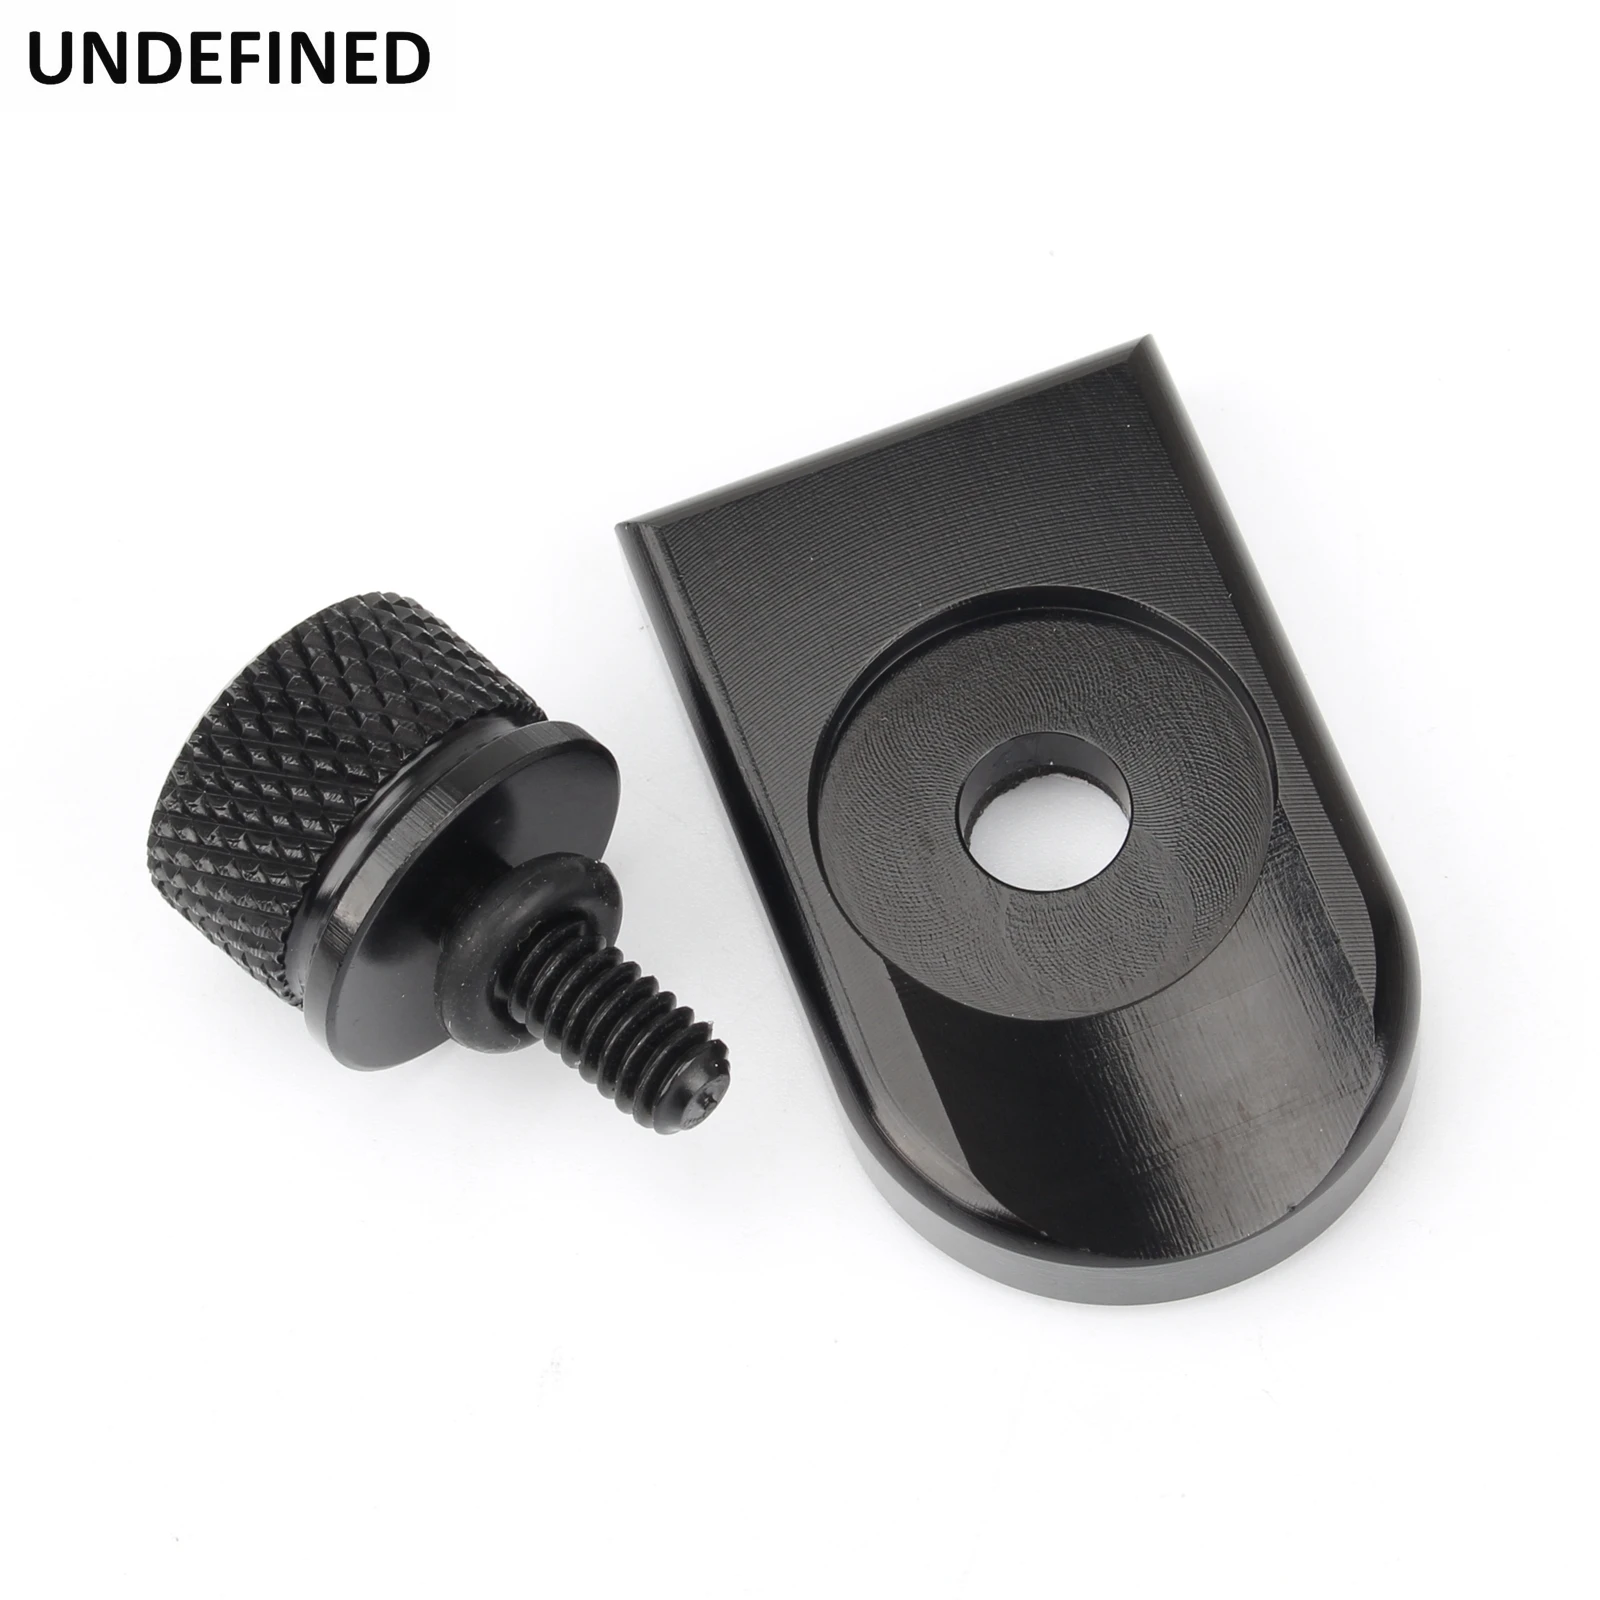 

Motorcycle Rear Fender Seat Bolt Screw Nut Knob Tab Cover Kit Mount For Harley Sportster XL Dyna Softail Fat Bob Touring FLHR